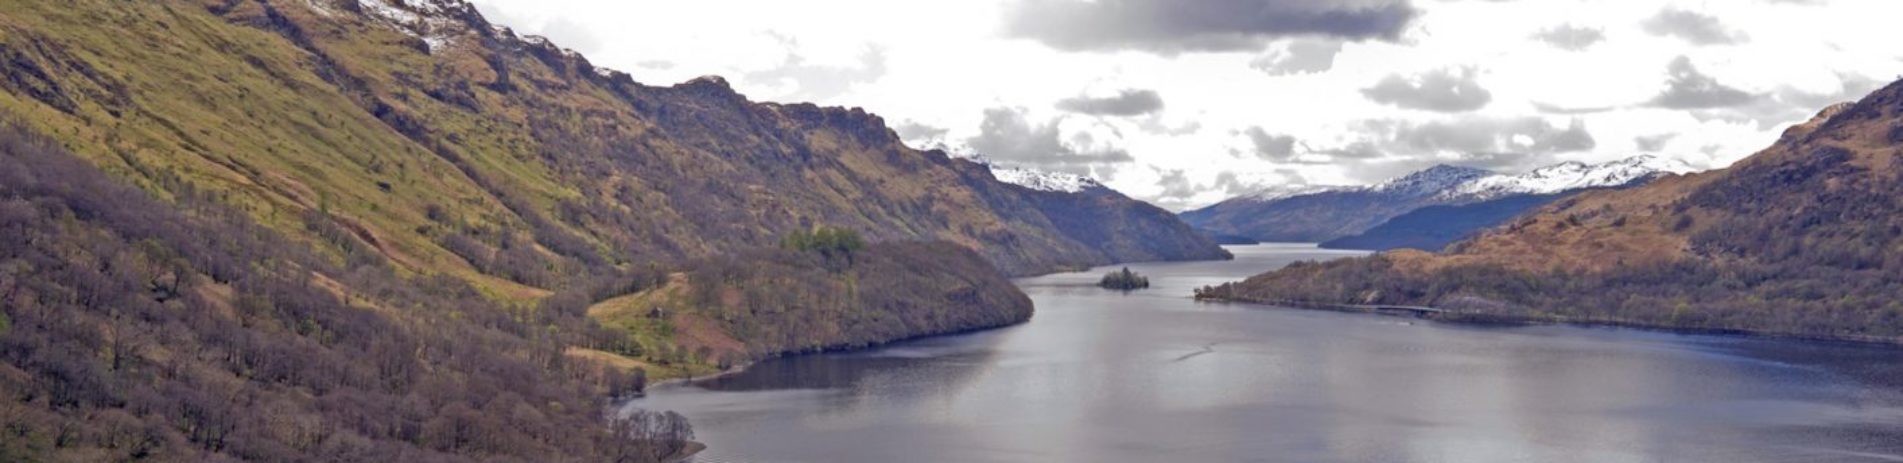 panorama-of-hills-and-north-loch-lomond-in-late-autumn